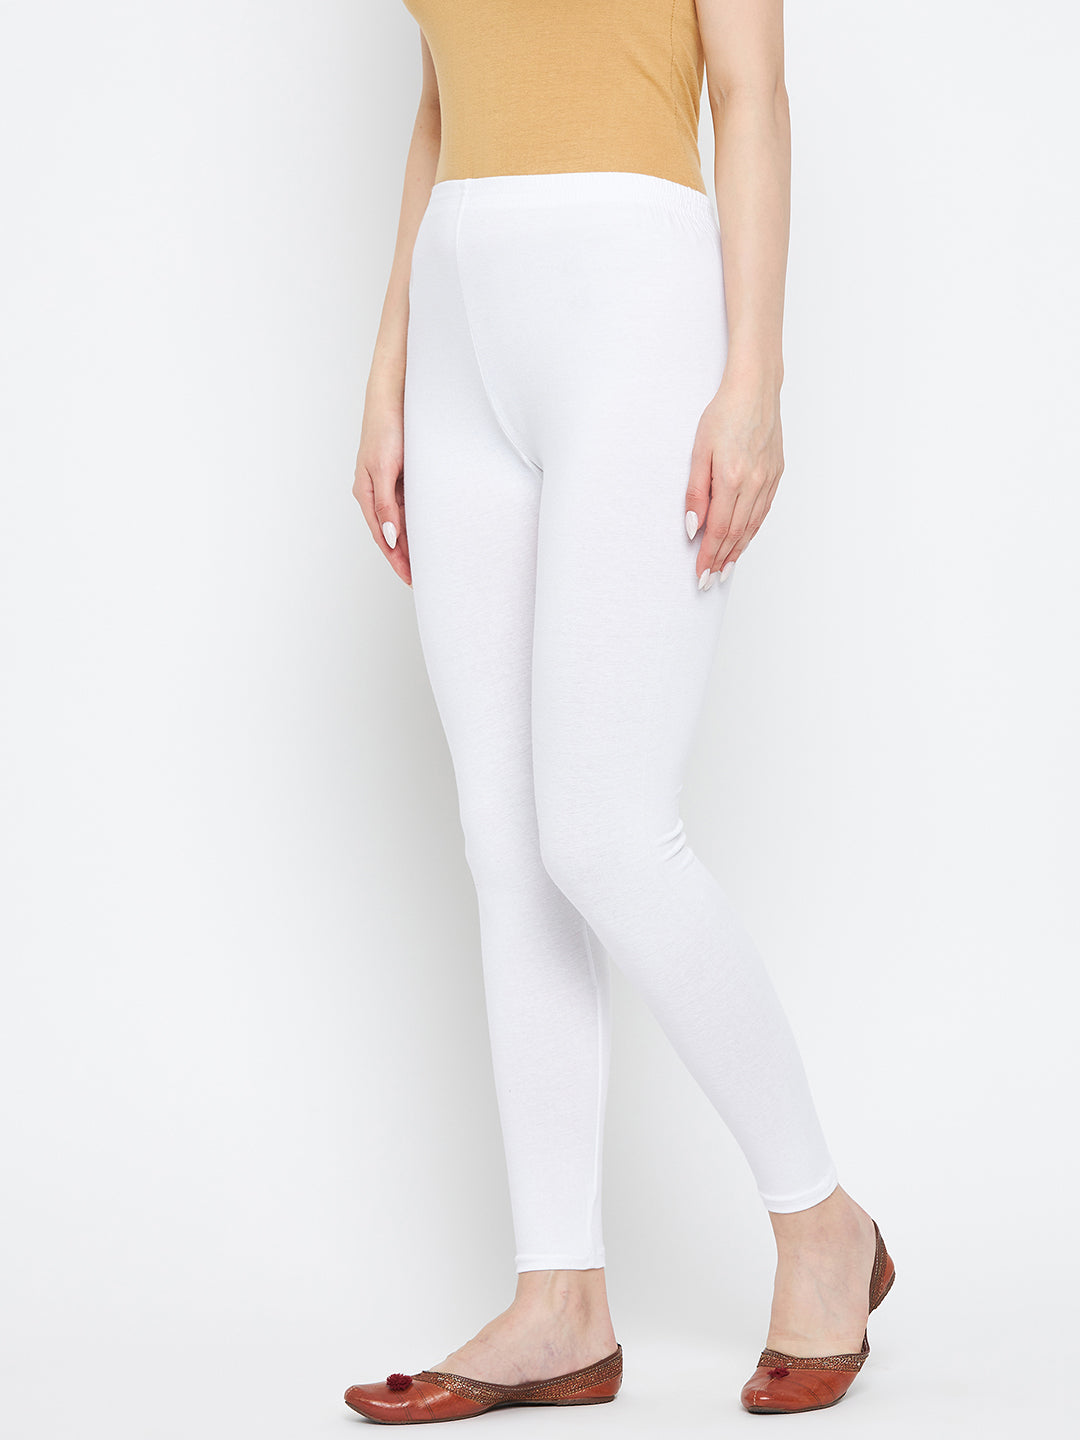 Clora Off-White Solid Ankle Length Leggings